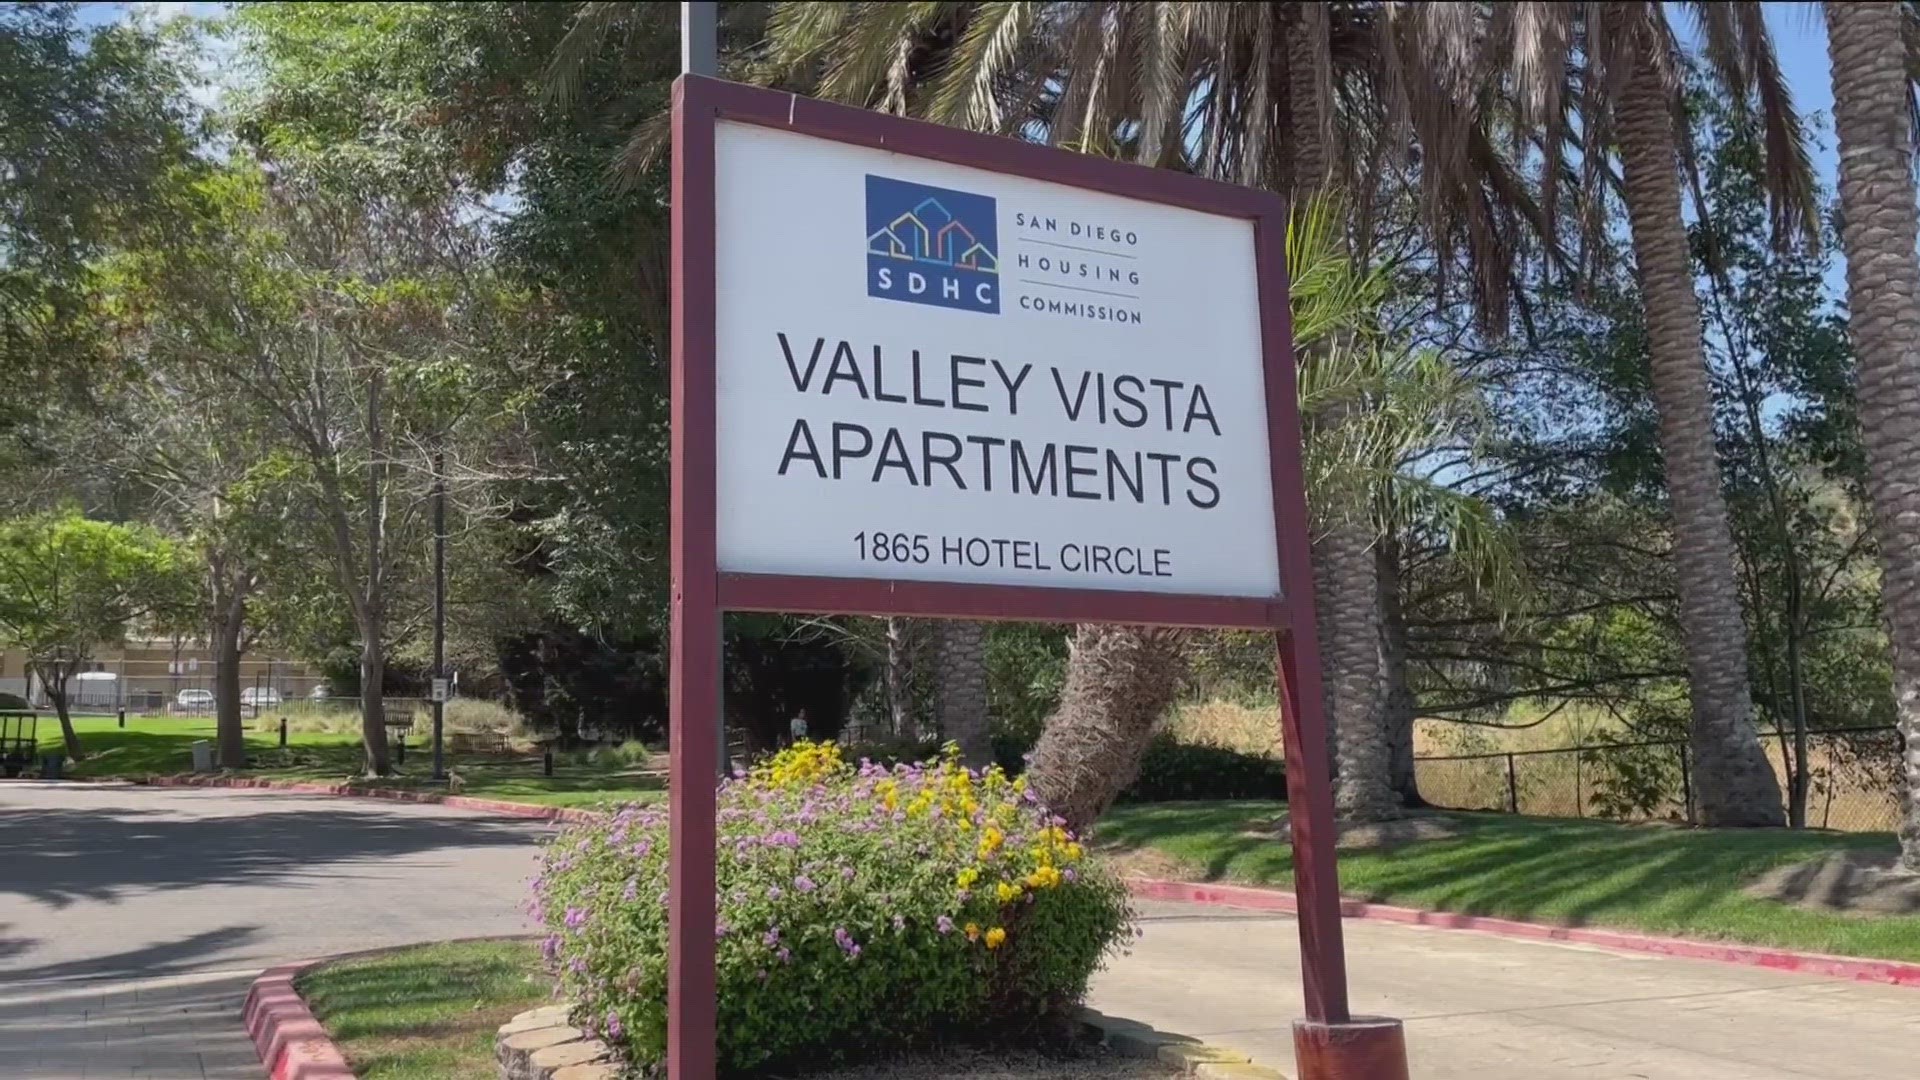 The Residence Inn on Hotel Circle South, now called Valley Vista, was recently renovated and transformed into a warm and functional living space.